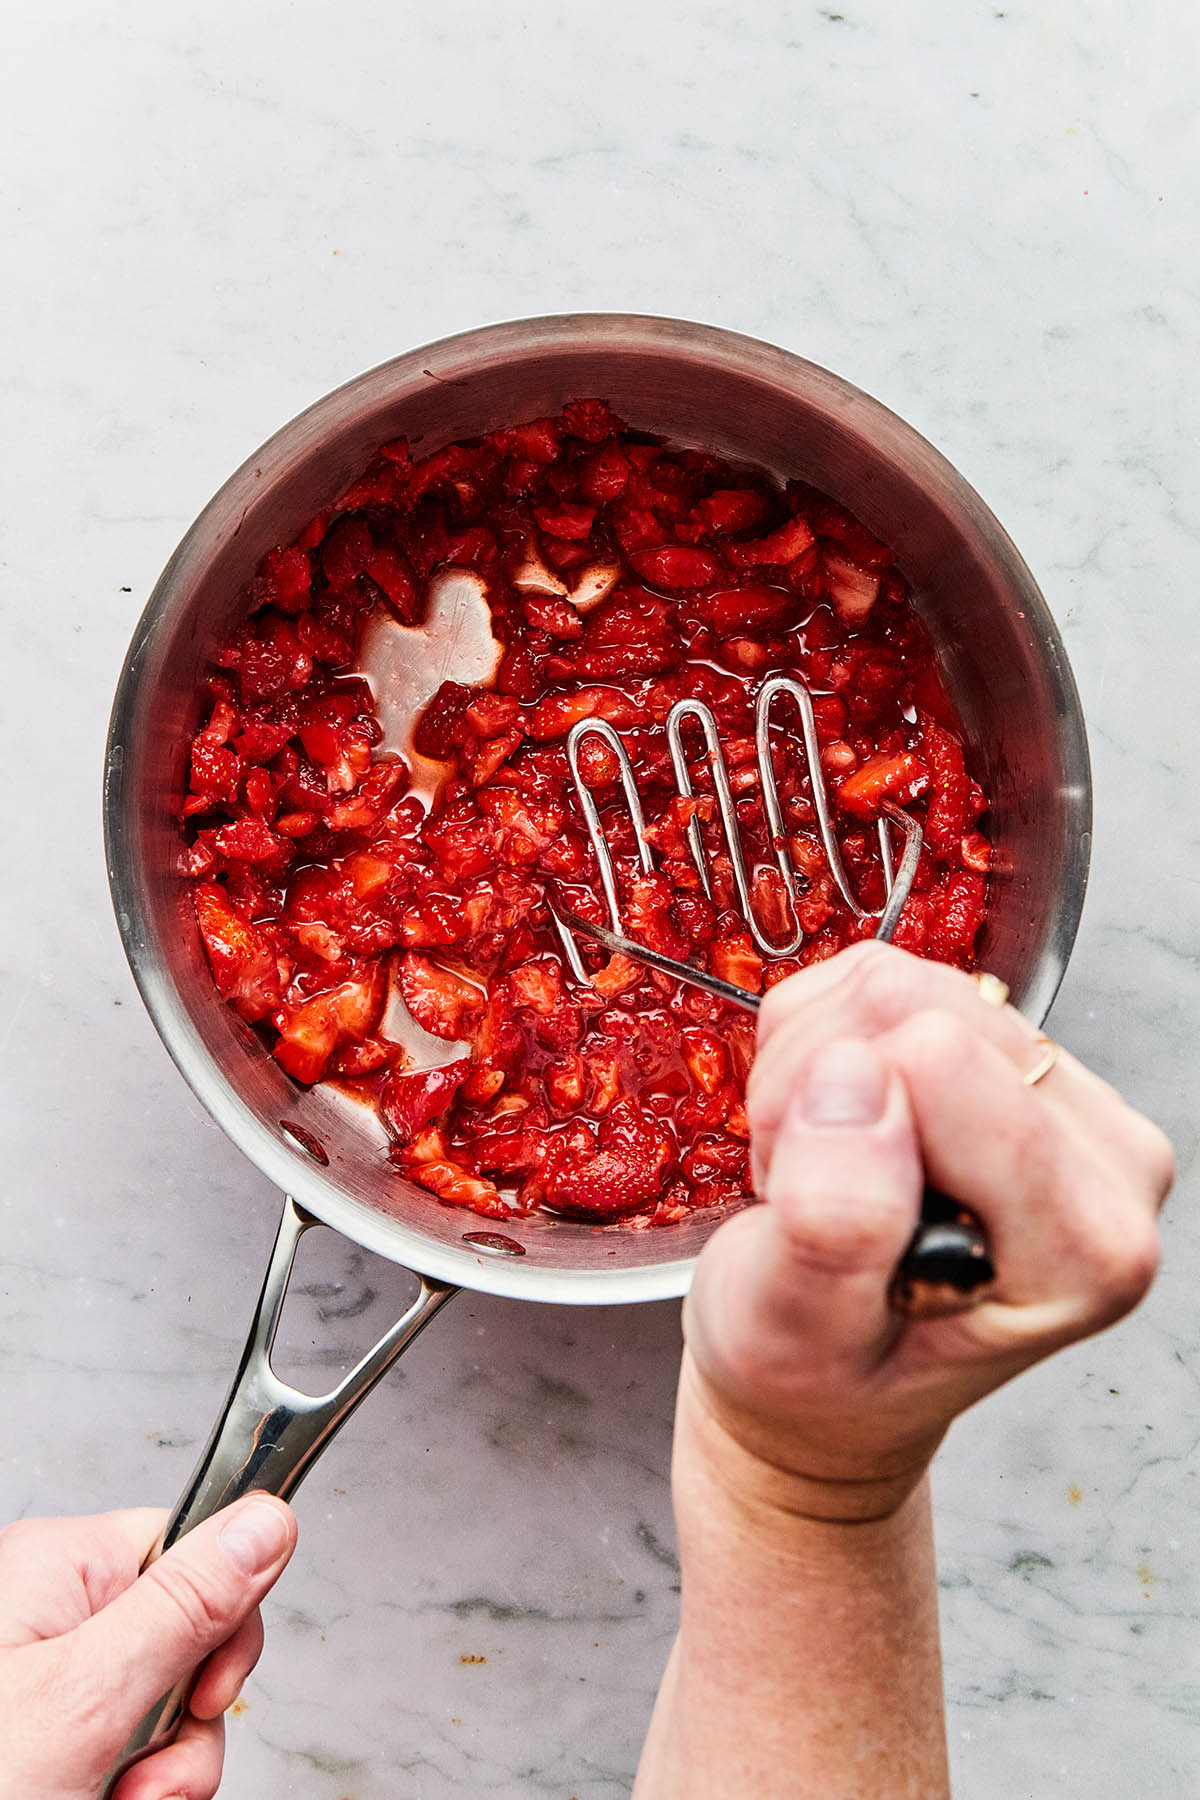 A hand using a potato masher to crush strawberries in a pot.